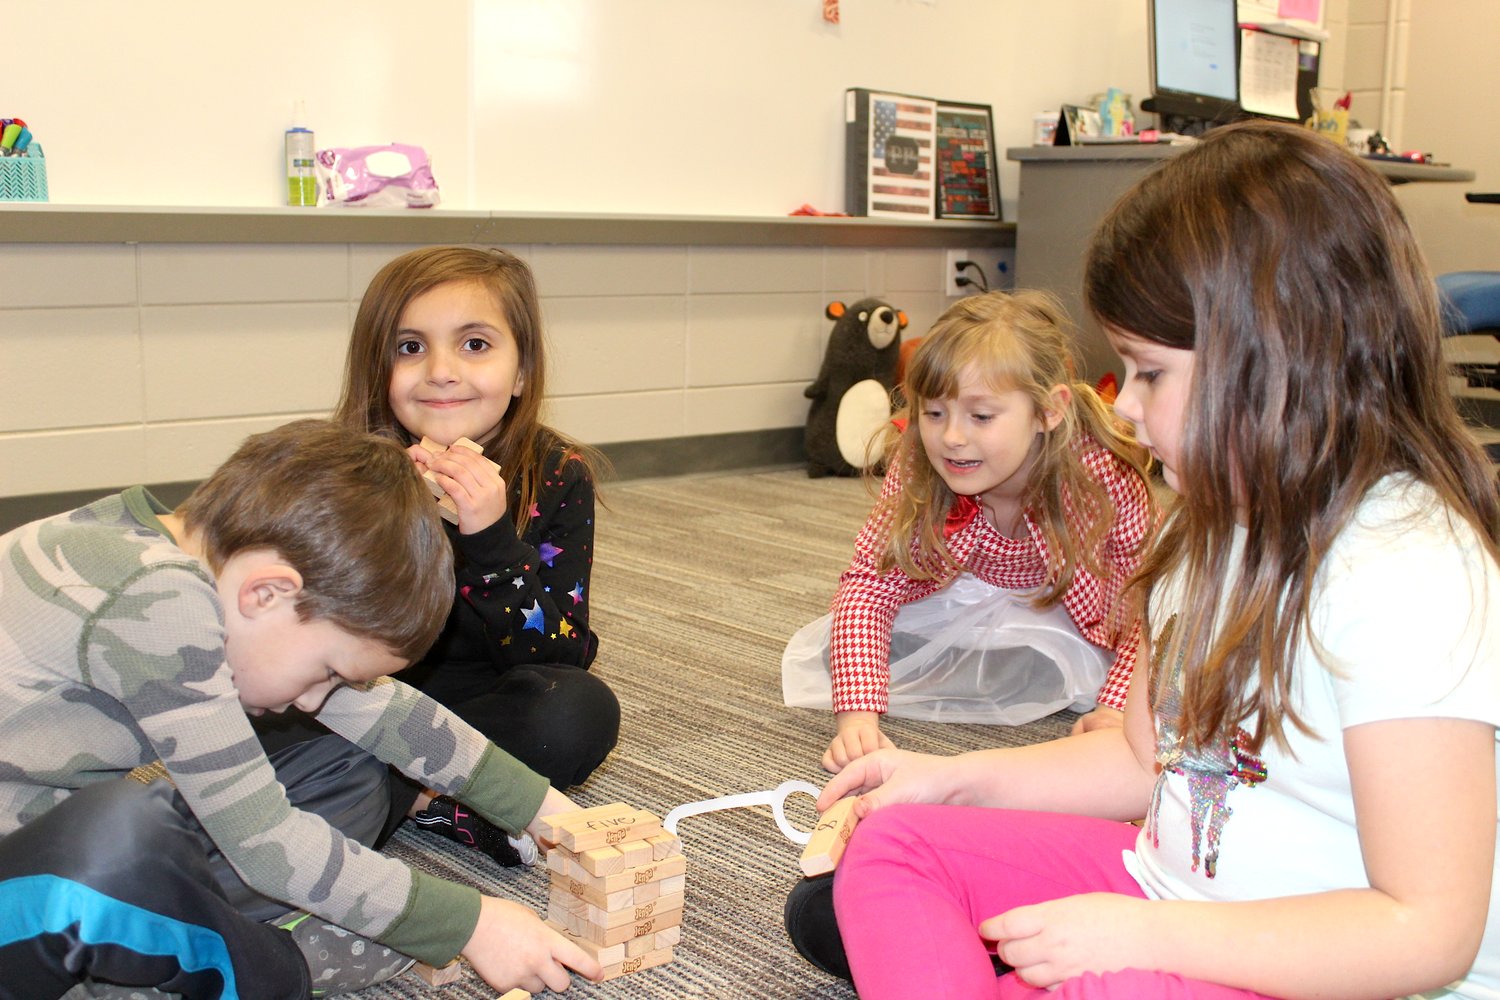 Students Rylin Tyrrell (from left), Abby Tapin, Odette Leaming and Finley Kunley assemble a tower with 100 blocks, each with a number or word written on them, Friday at Sommer Elementary.